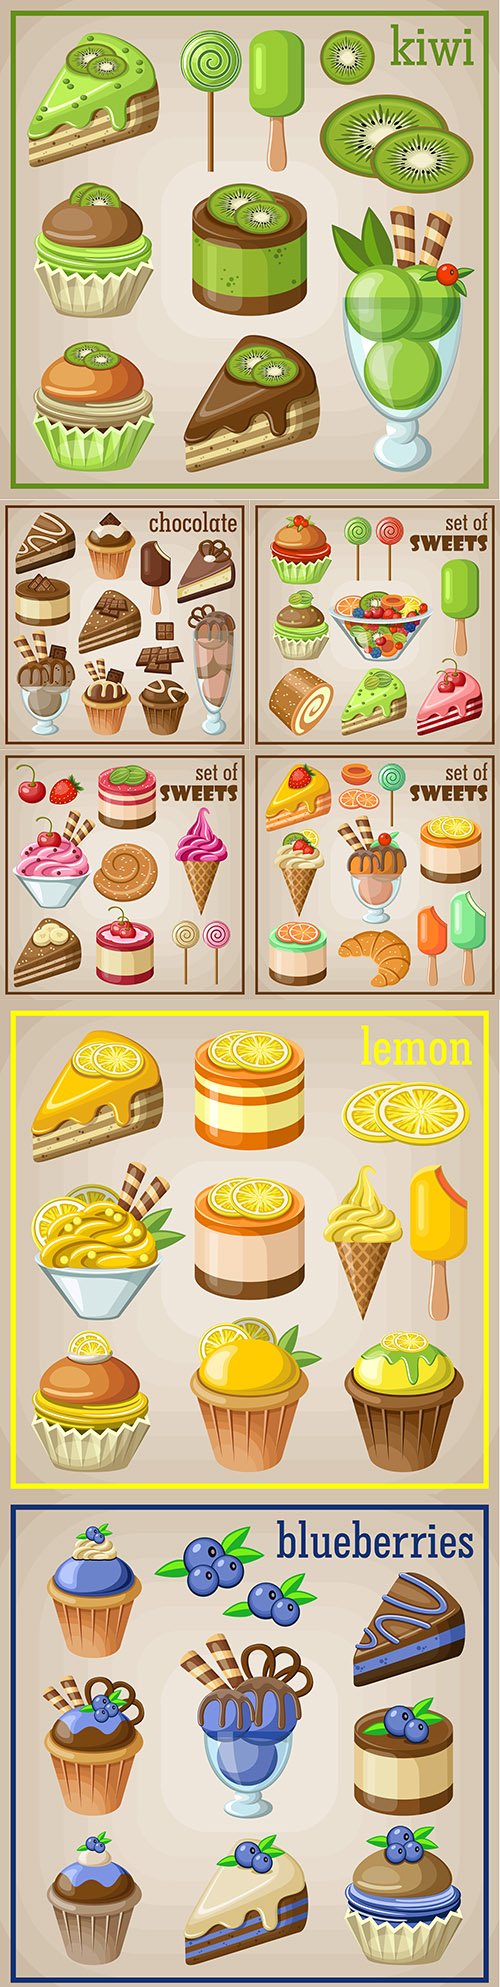 Candy and cakes with fruit glaze collection illustration